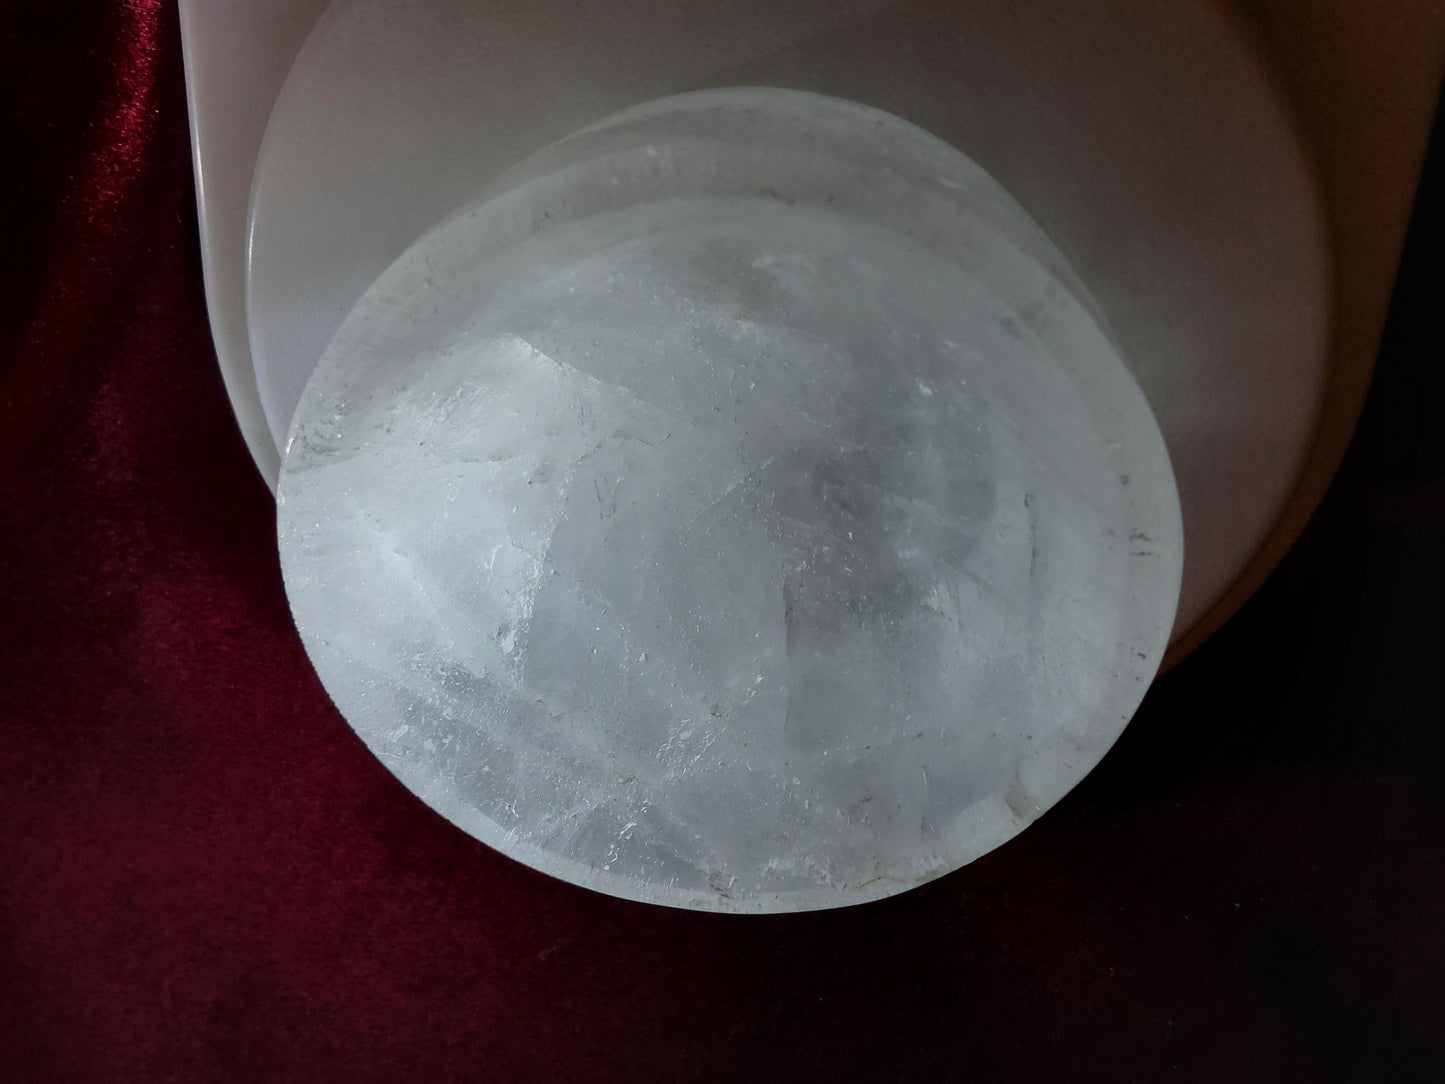 High quality natural white crystal demagnetization bowl (big size)